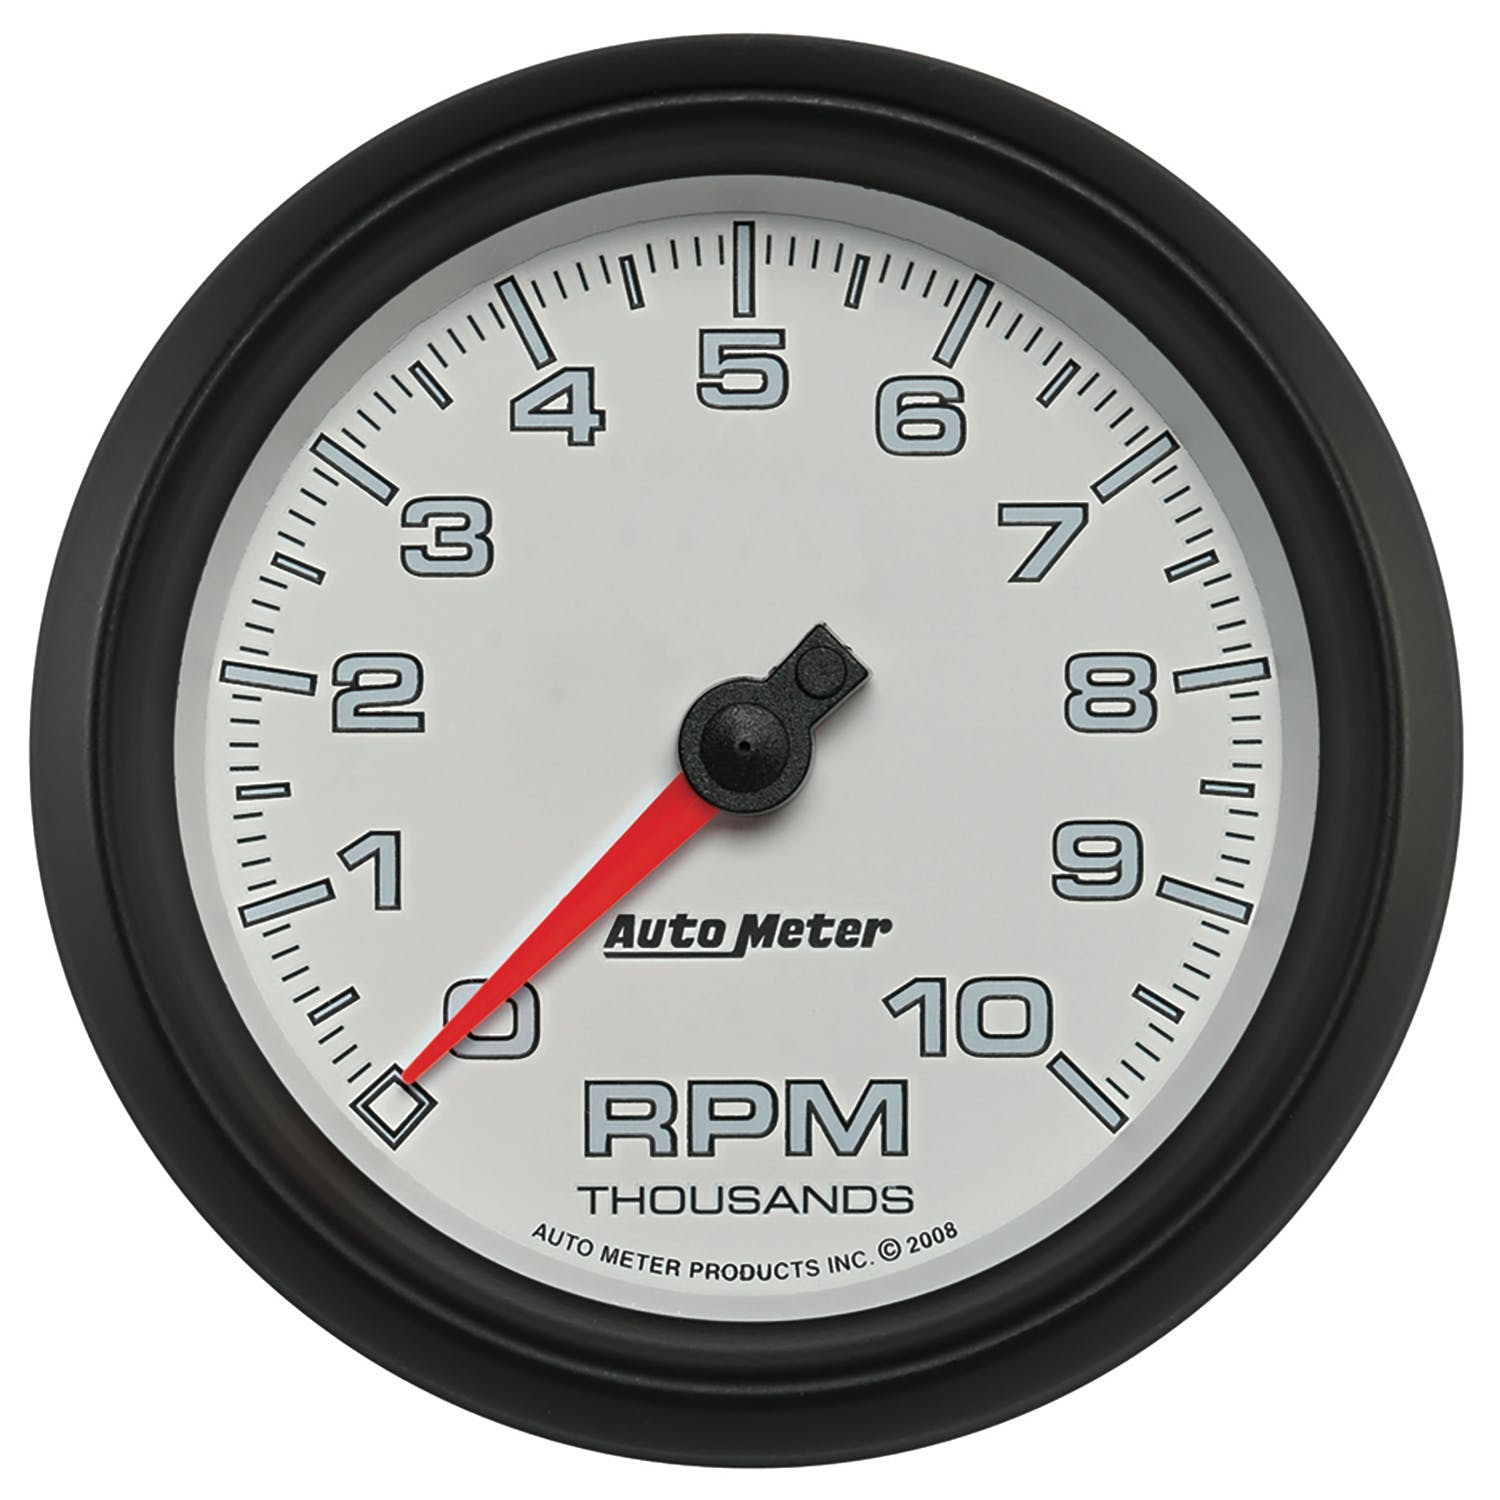 AutoMeter Products 19598 Tachometer Gauge, White-Pro Cycle 3 3/8, 10,000 RPM